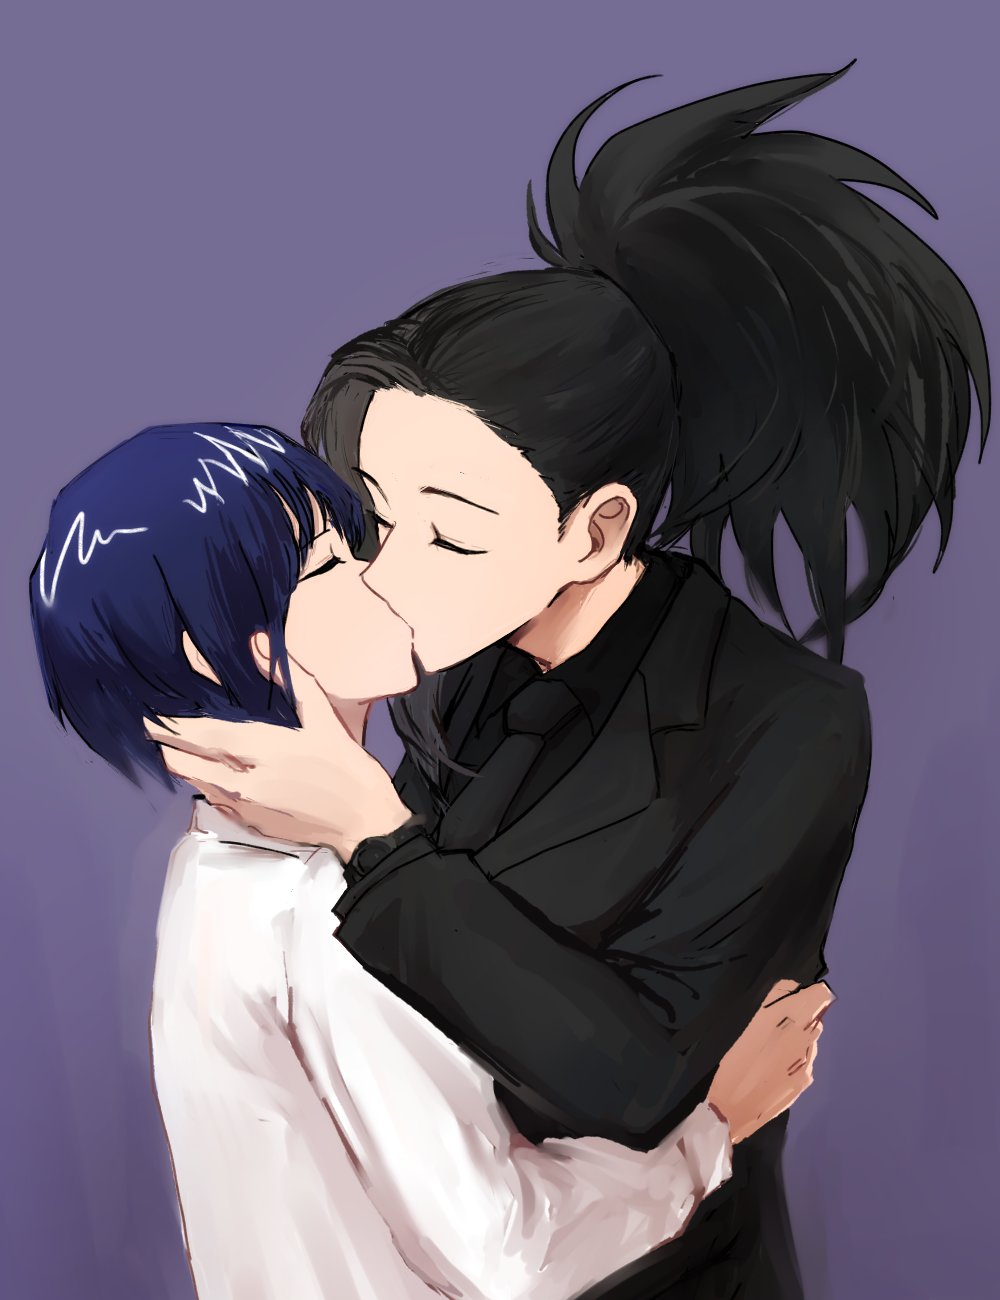 2girls bangs black_hair black_neckwear blue_hair boku_no_hero_academia business_suit clock closed_eyes eyebrows_visible_through_hair formal hand_on_another's_back hand_on_another's_head high_ponytail highres jirou_kyouka kiss multiple_girls necktie ponytail short_hair simple_background suit vvvmung watch watch yaoyorozu_momo yuri